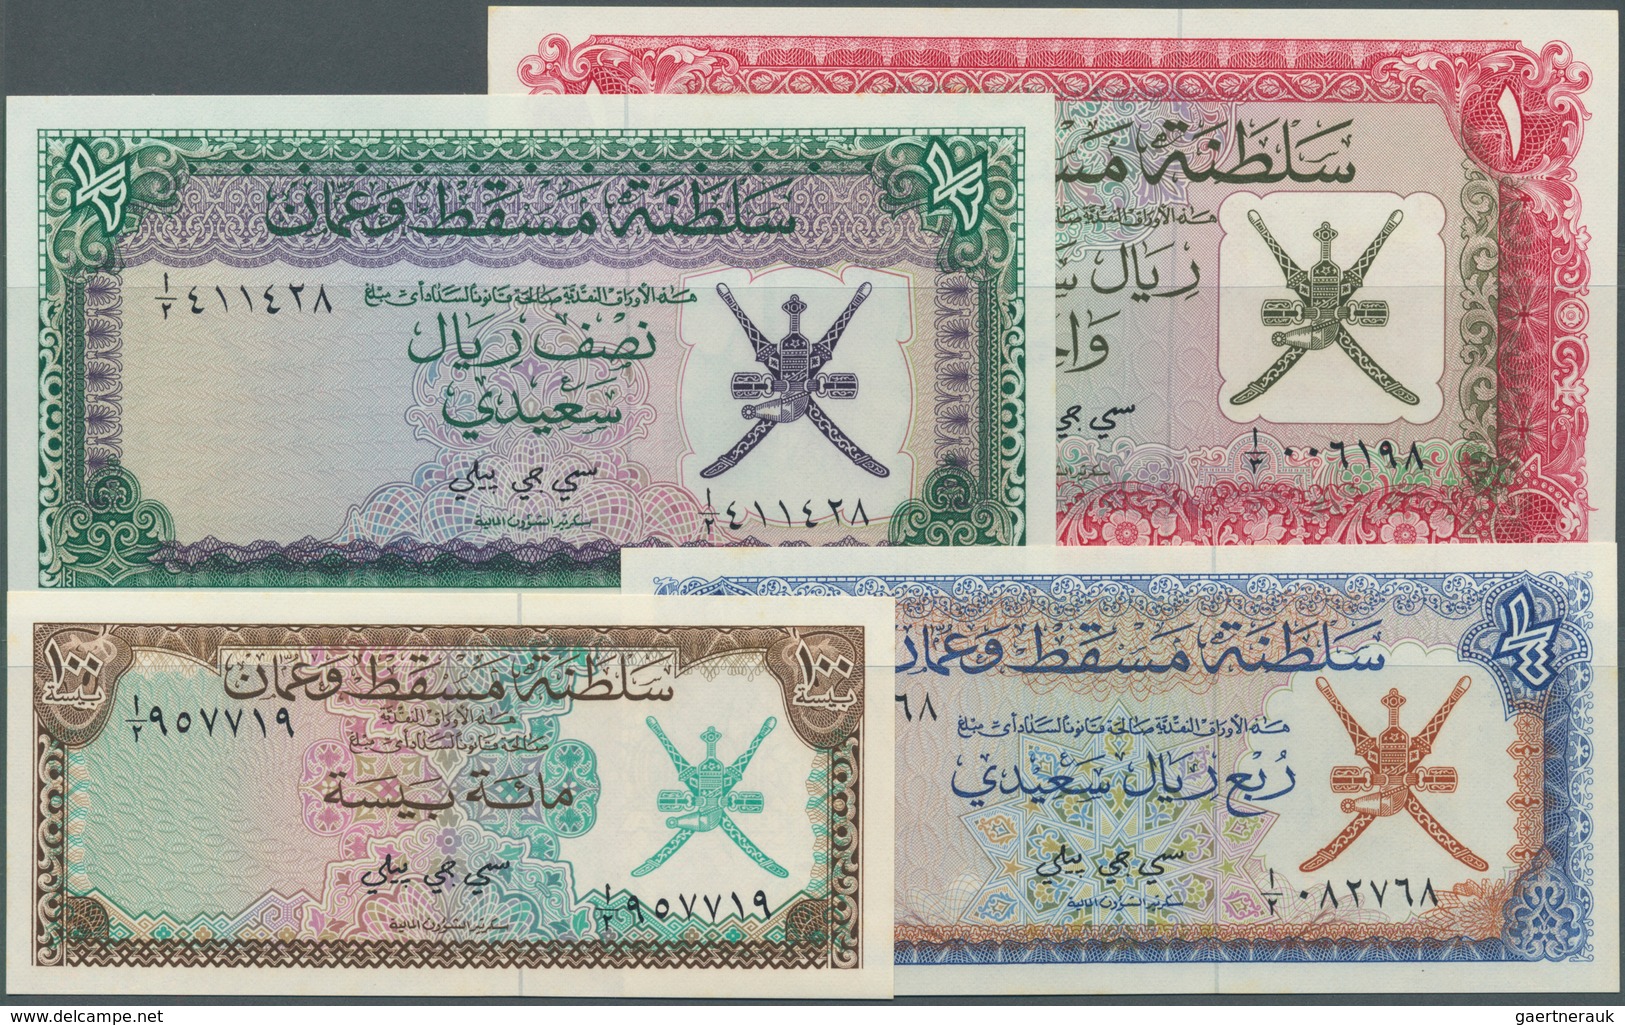 02176 Oman: Set Of 4 Notes Muscat & Oman Containing 100 Baisa, 1/4, 1/2 And 1 Rial ND P. 1-4 In Condition: - Oman